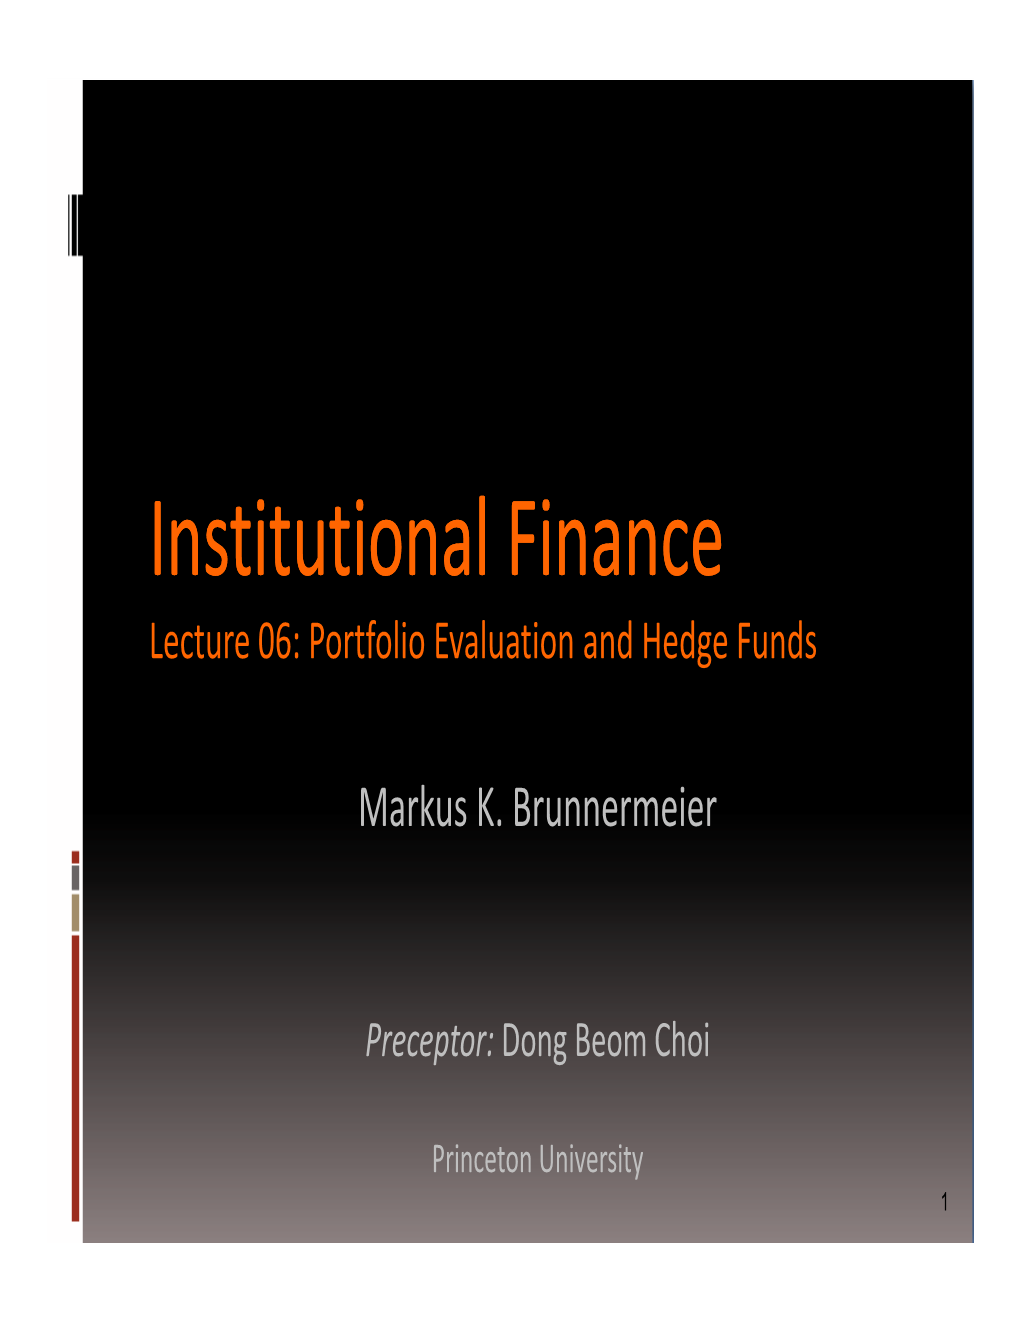 Institutional Finance Lecture 06: Portfolio Evaluation and Hedge Funds